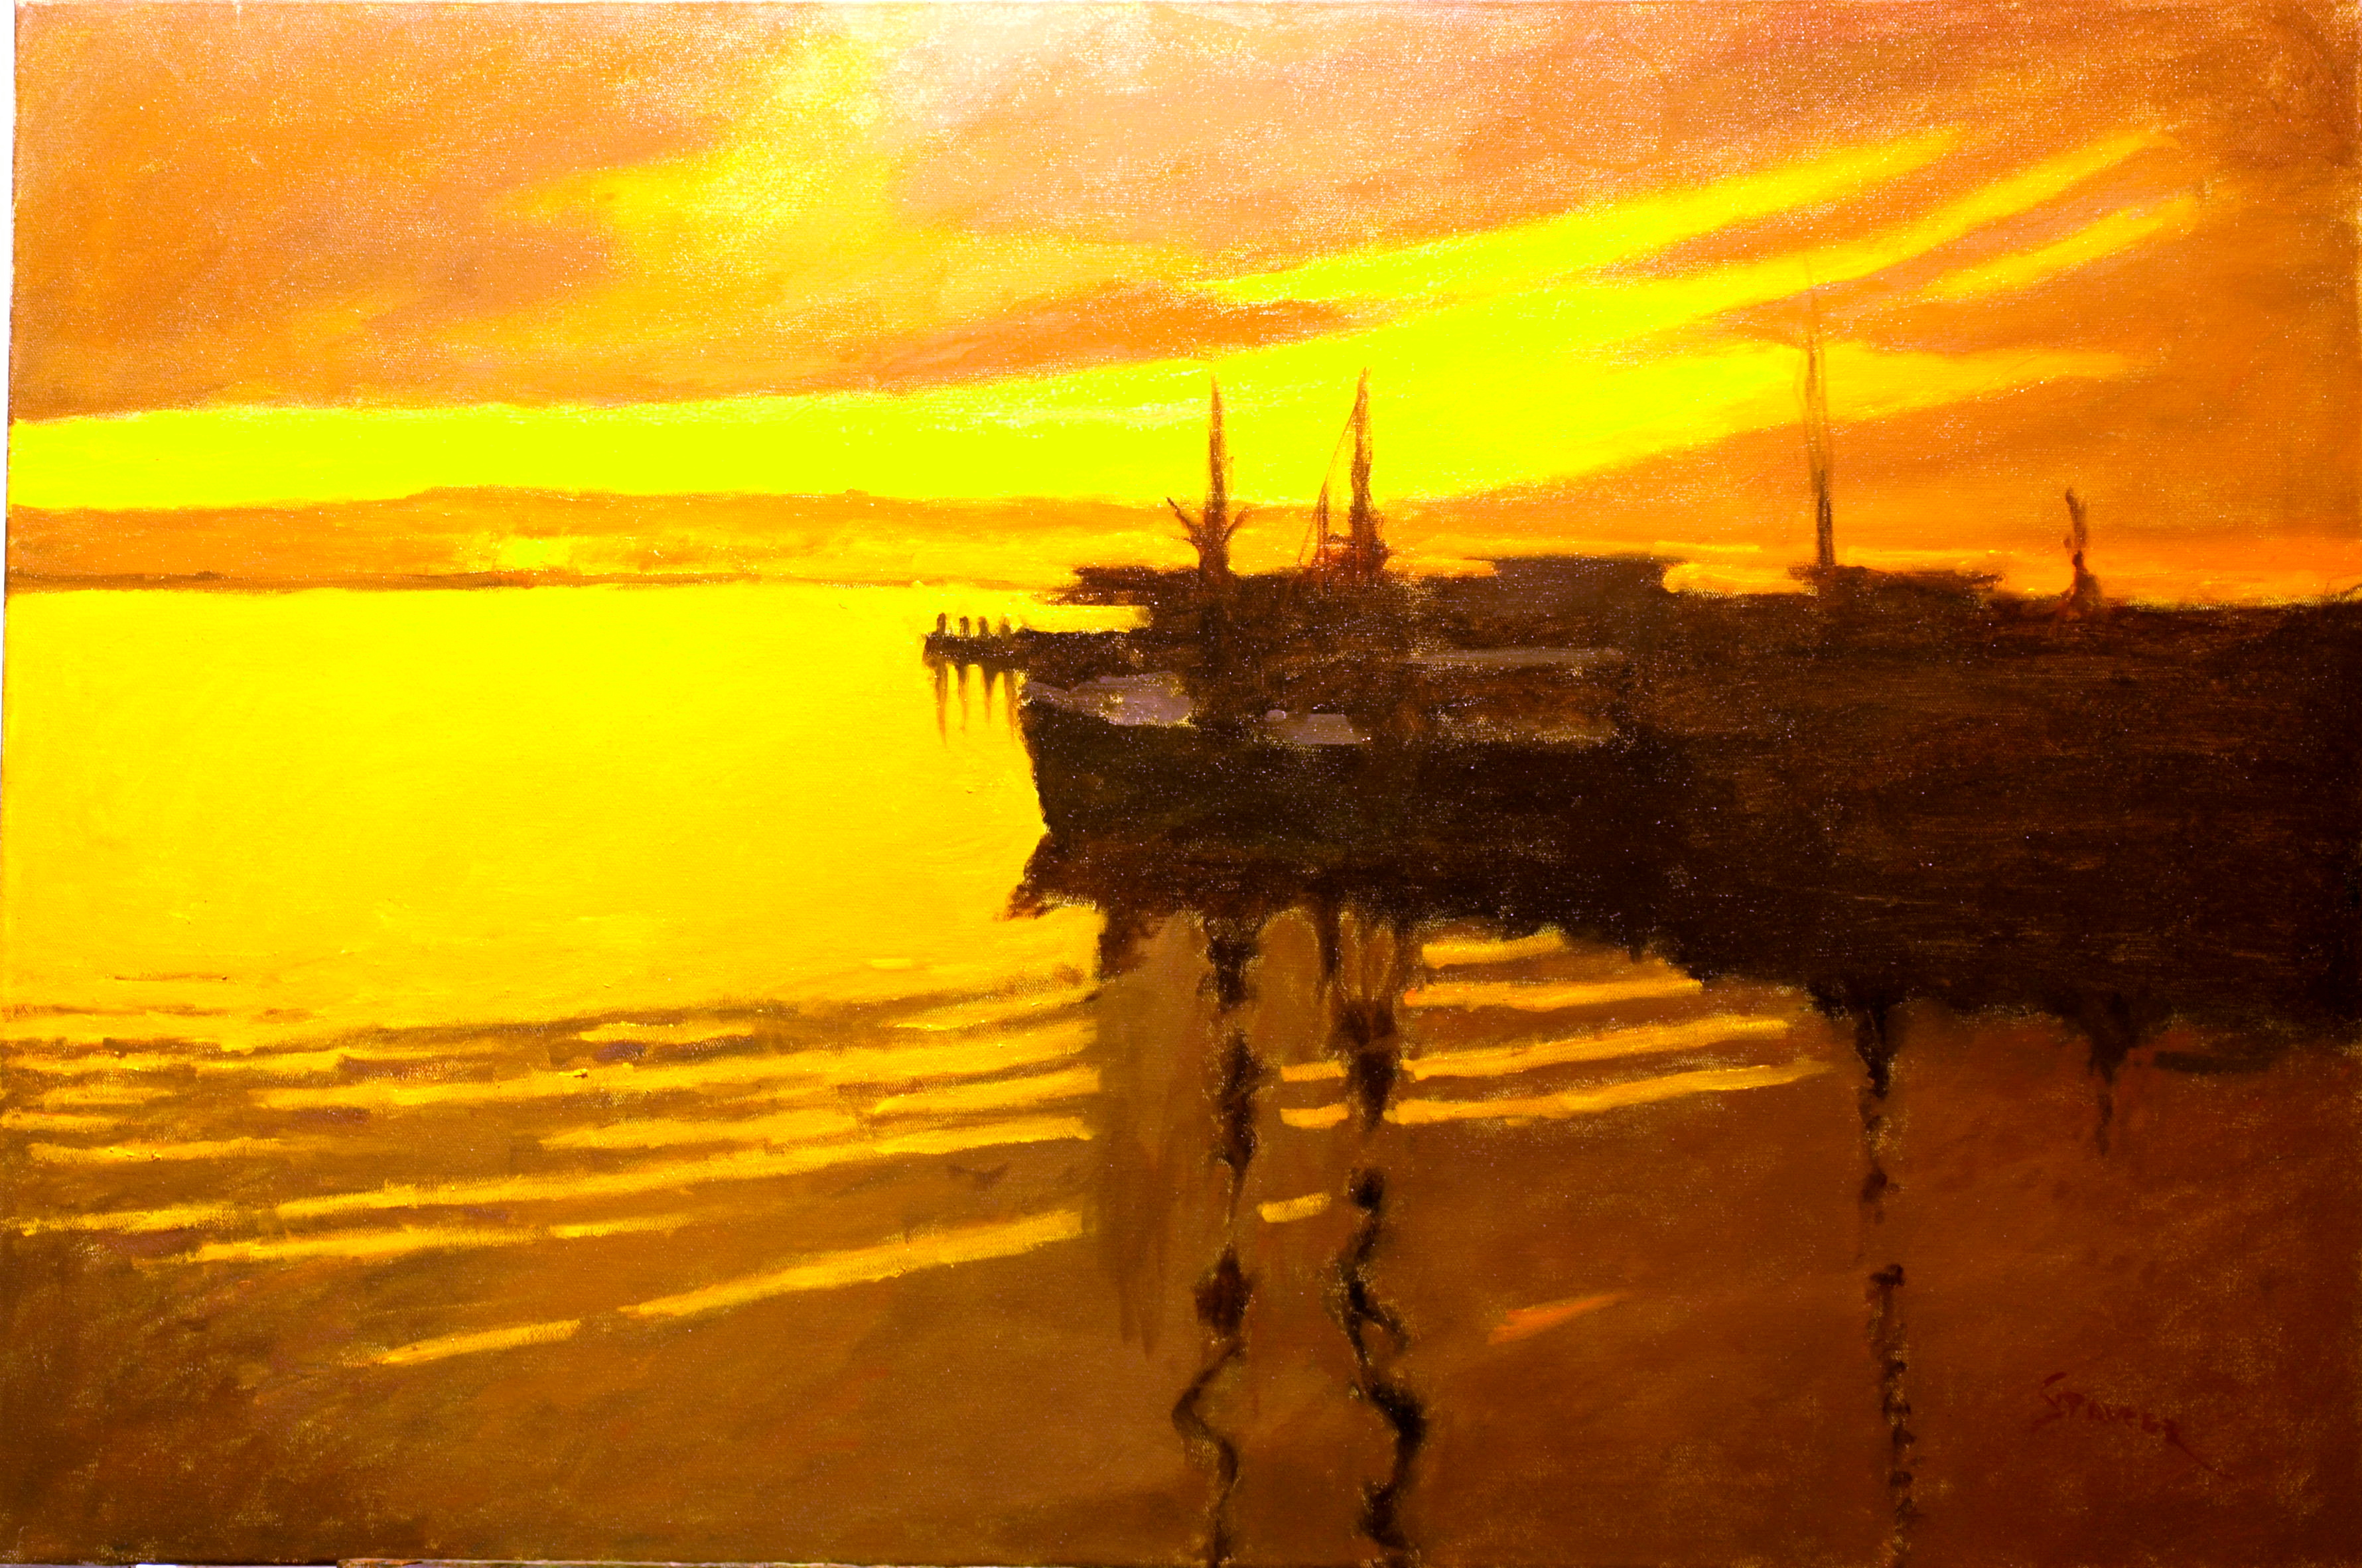 Sunset - Stonington Warves, Oil on Canvas, 24 x 36 Inches, by Richard Stalter, $1200